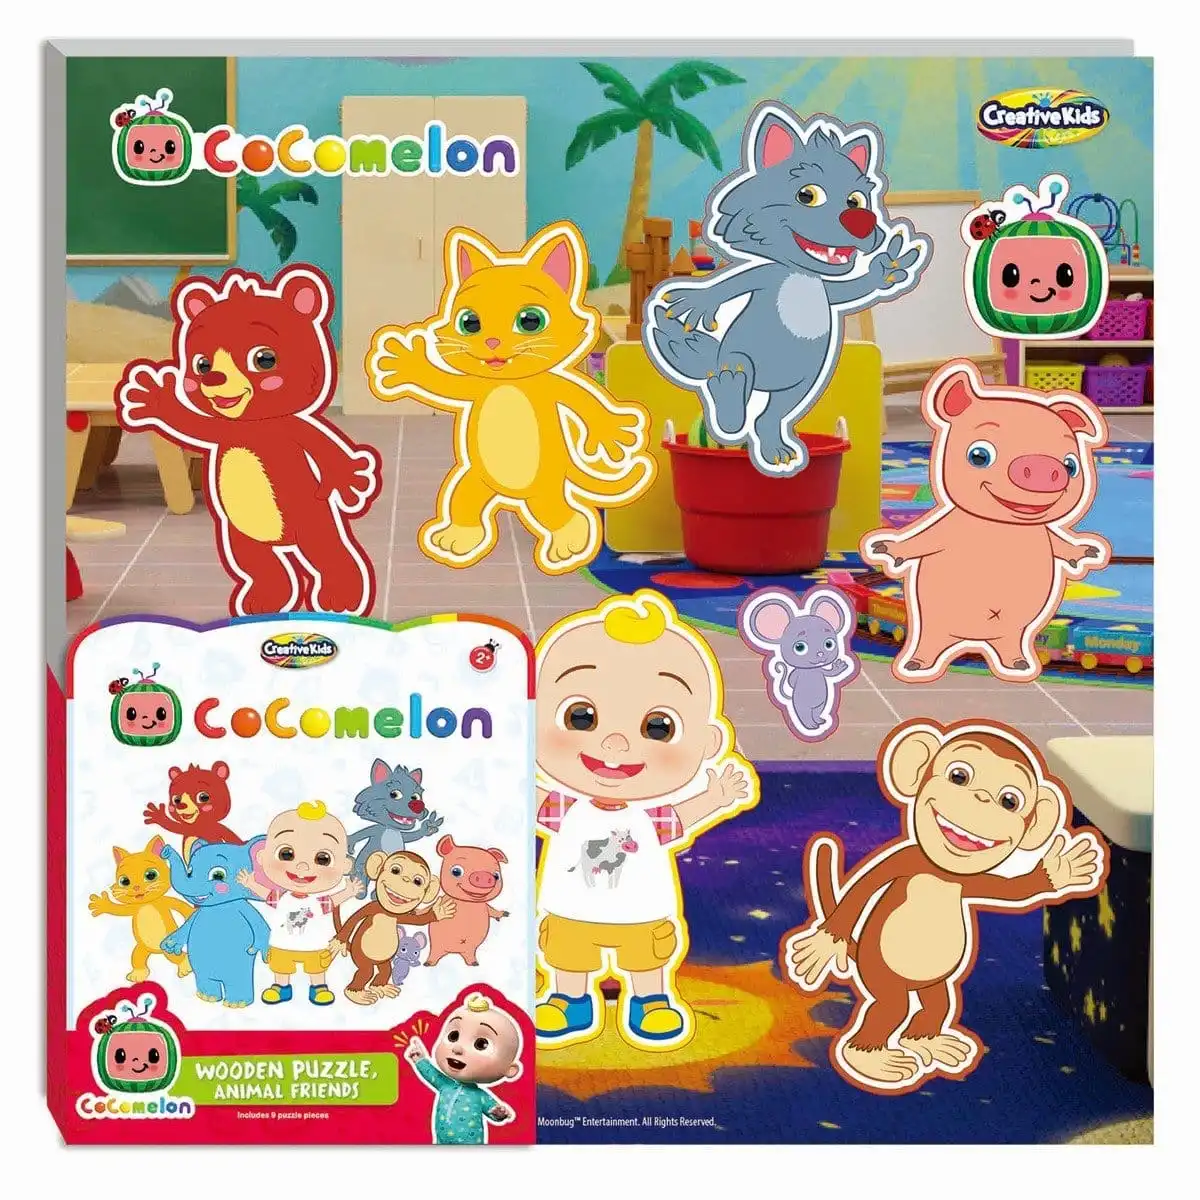 Cocomelon Chunky Puzzles - Animal Friends